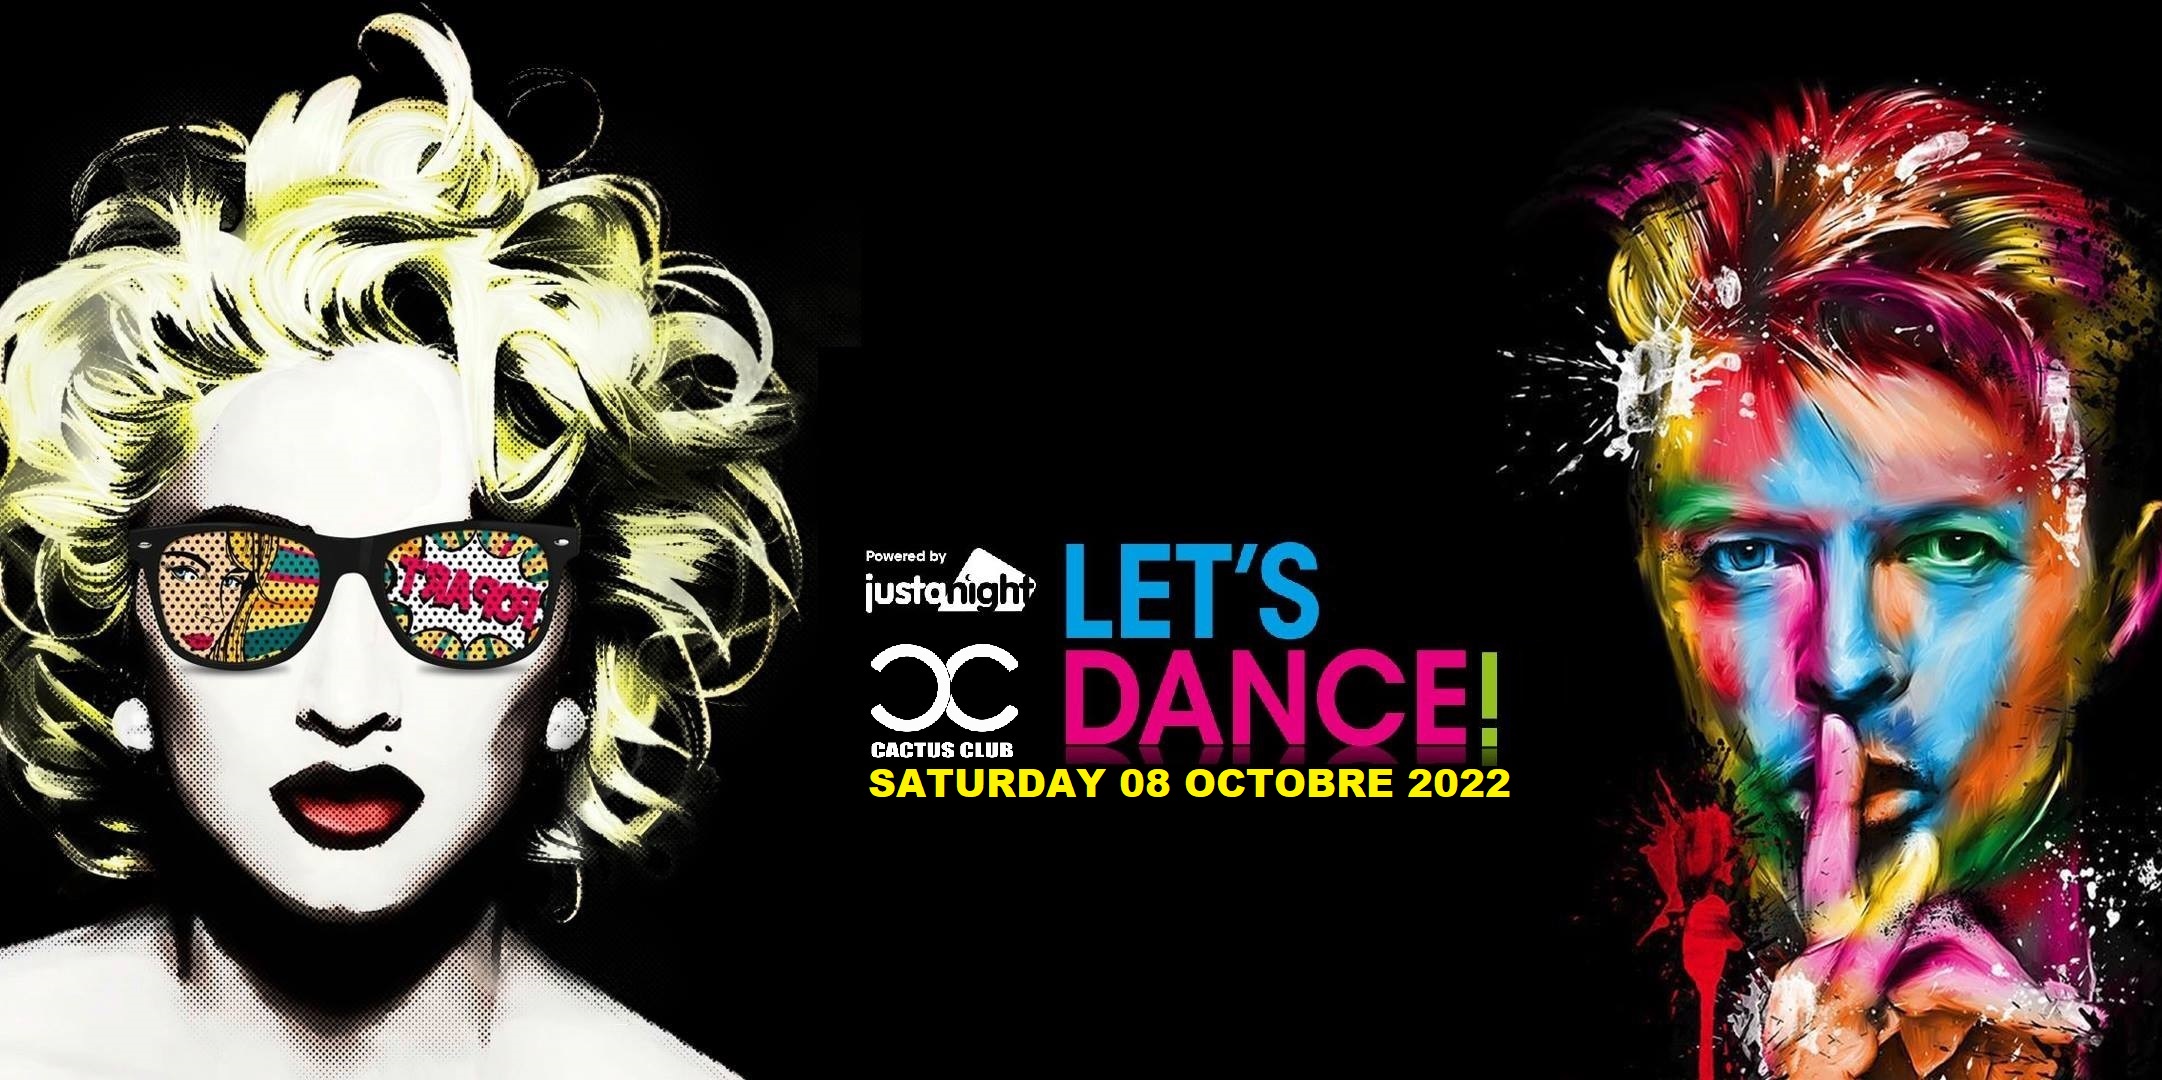 LET'S DANCE - International Party / powered by Just A Night Label